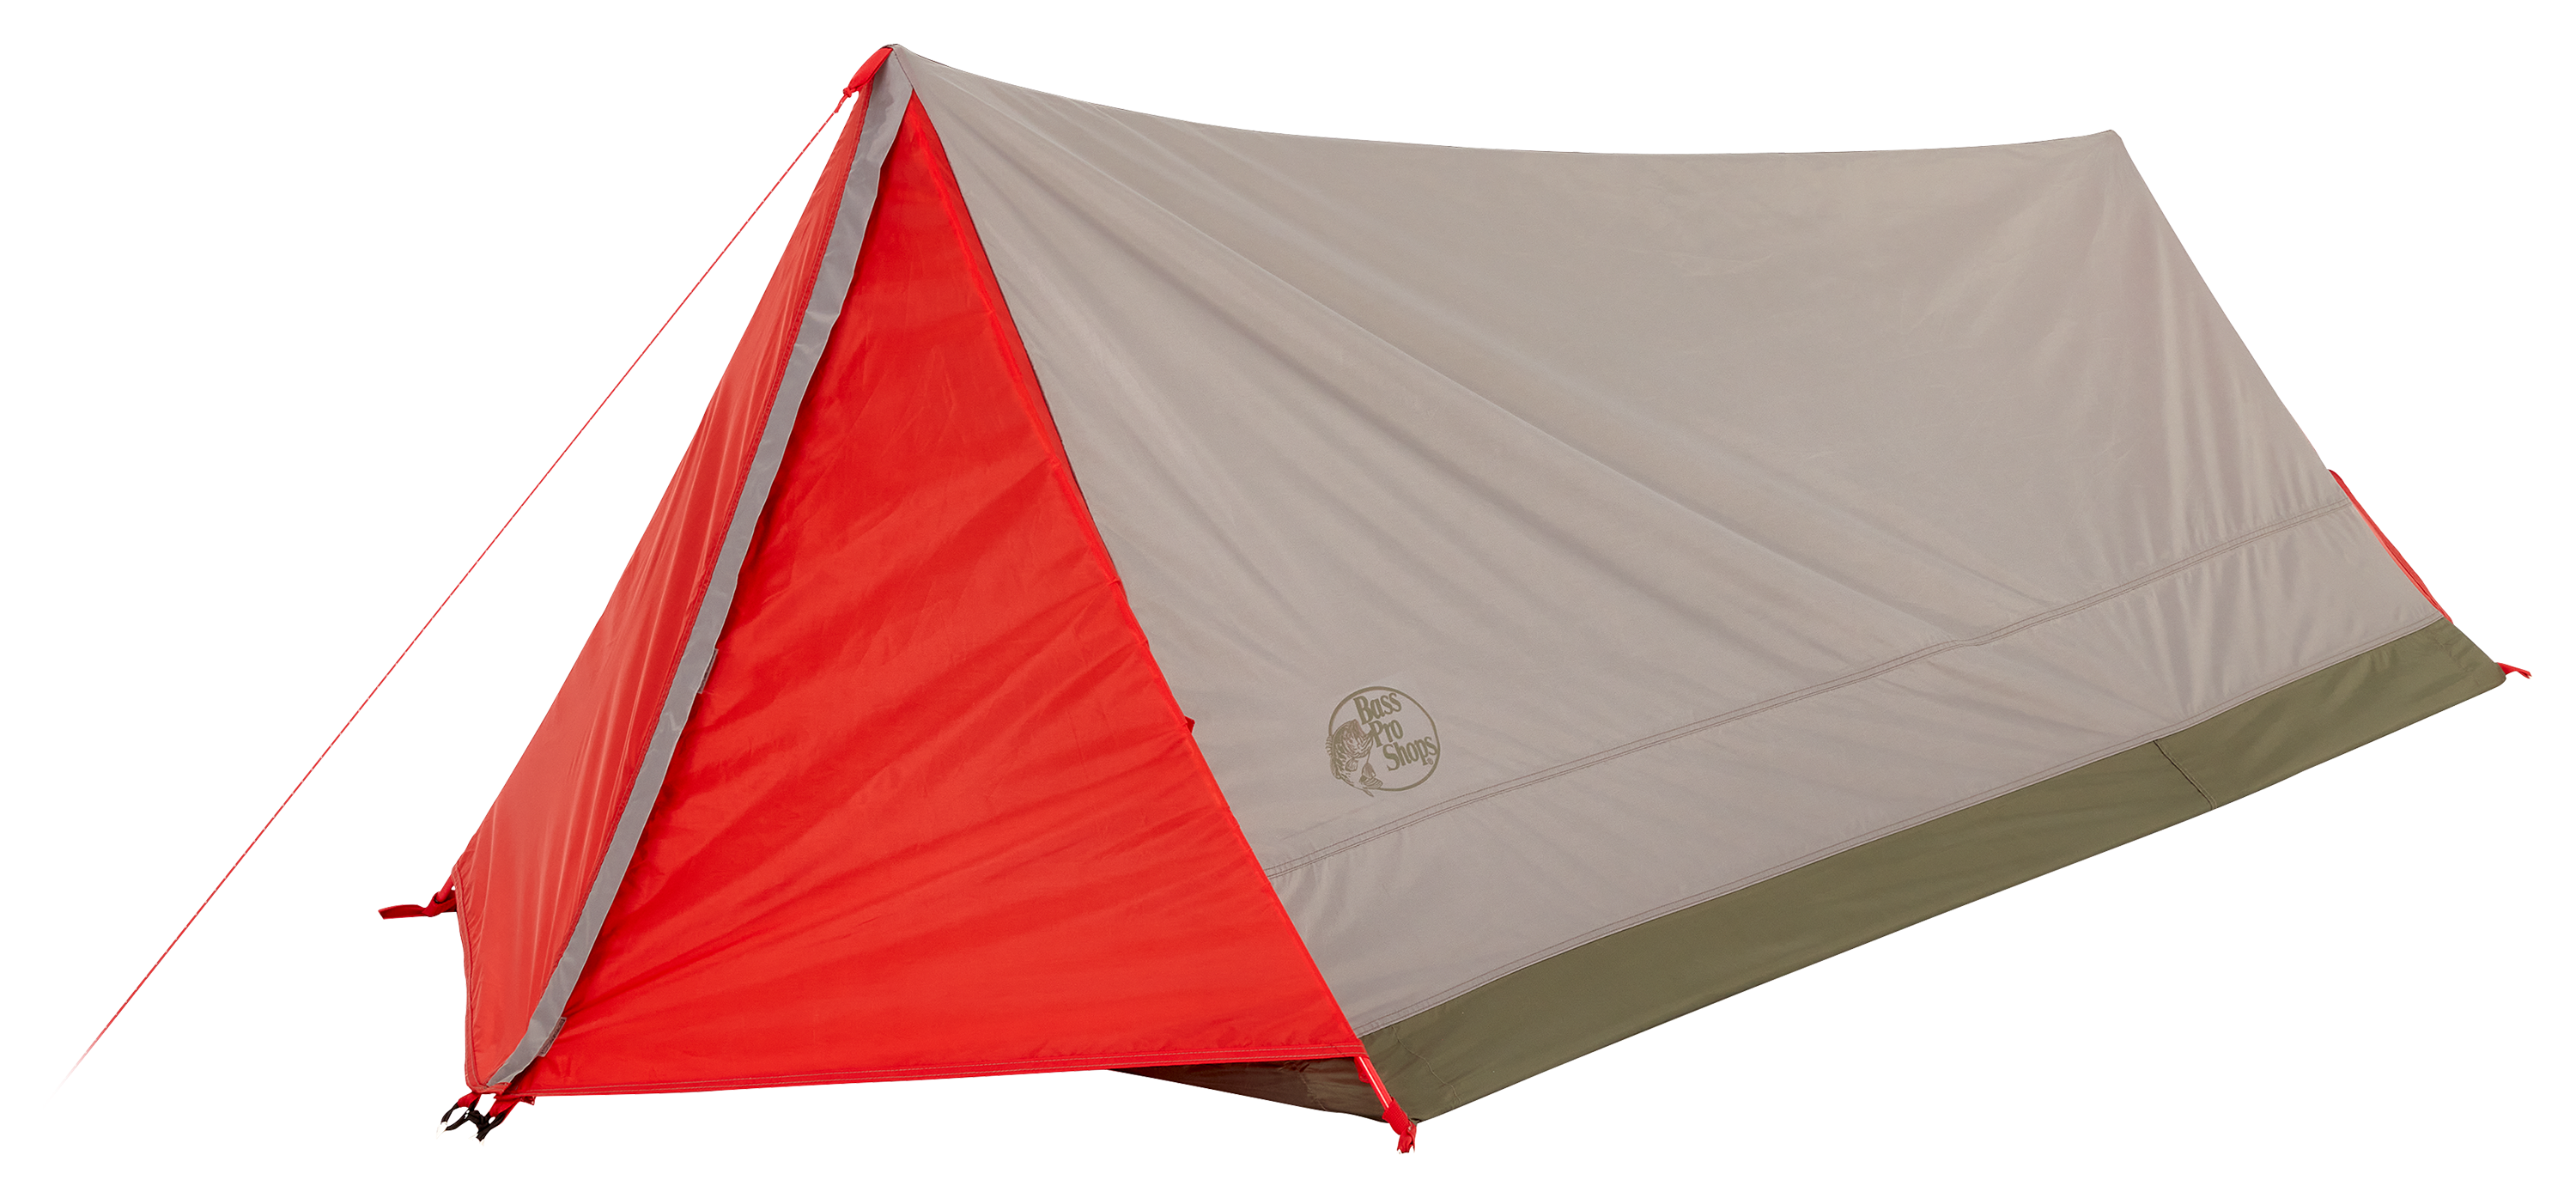 Tents for Camping & Outdoors